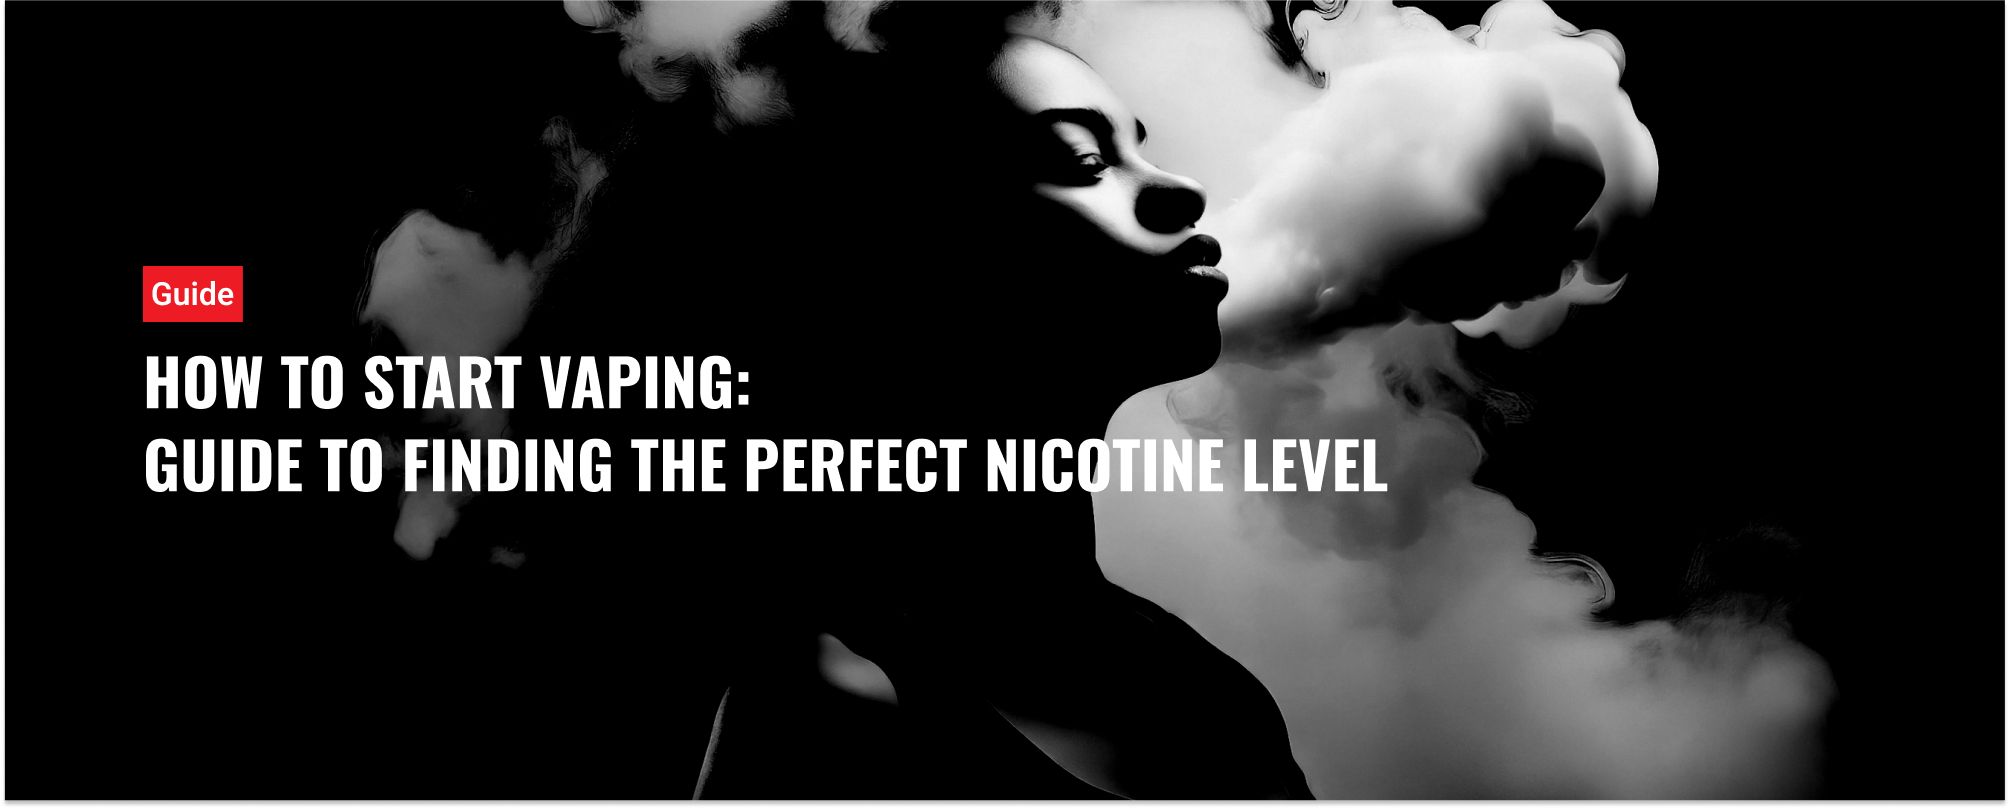 How to Start Vaping: Guide to Finding the Perfect Nicotine Level